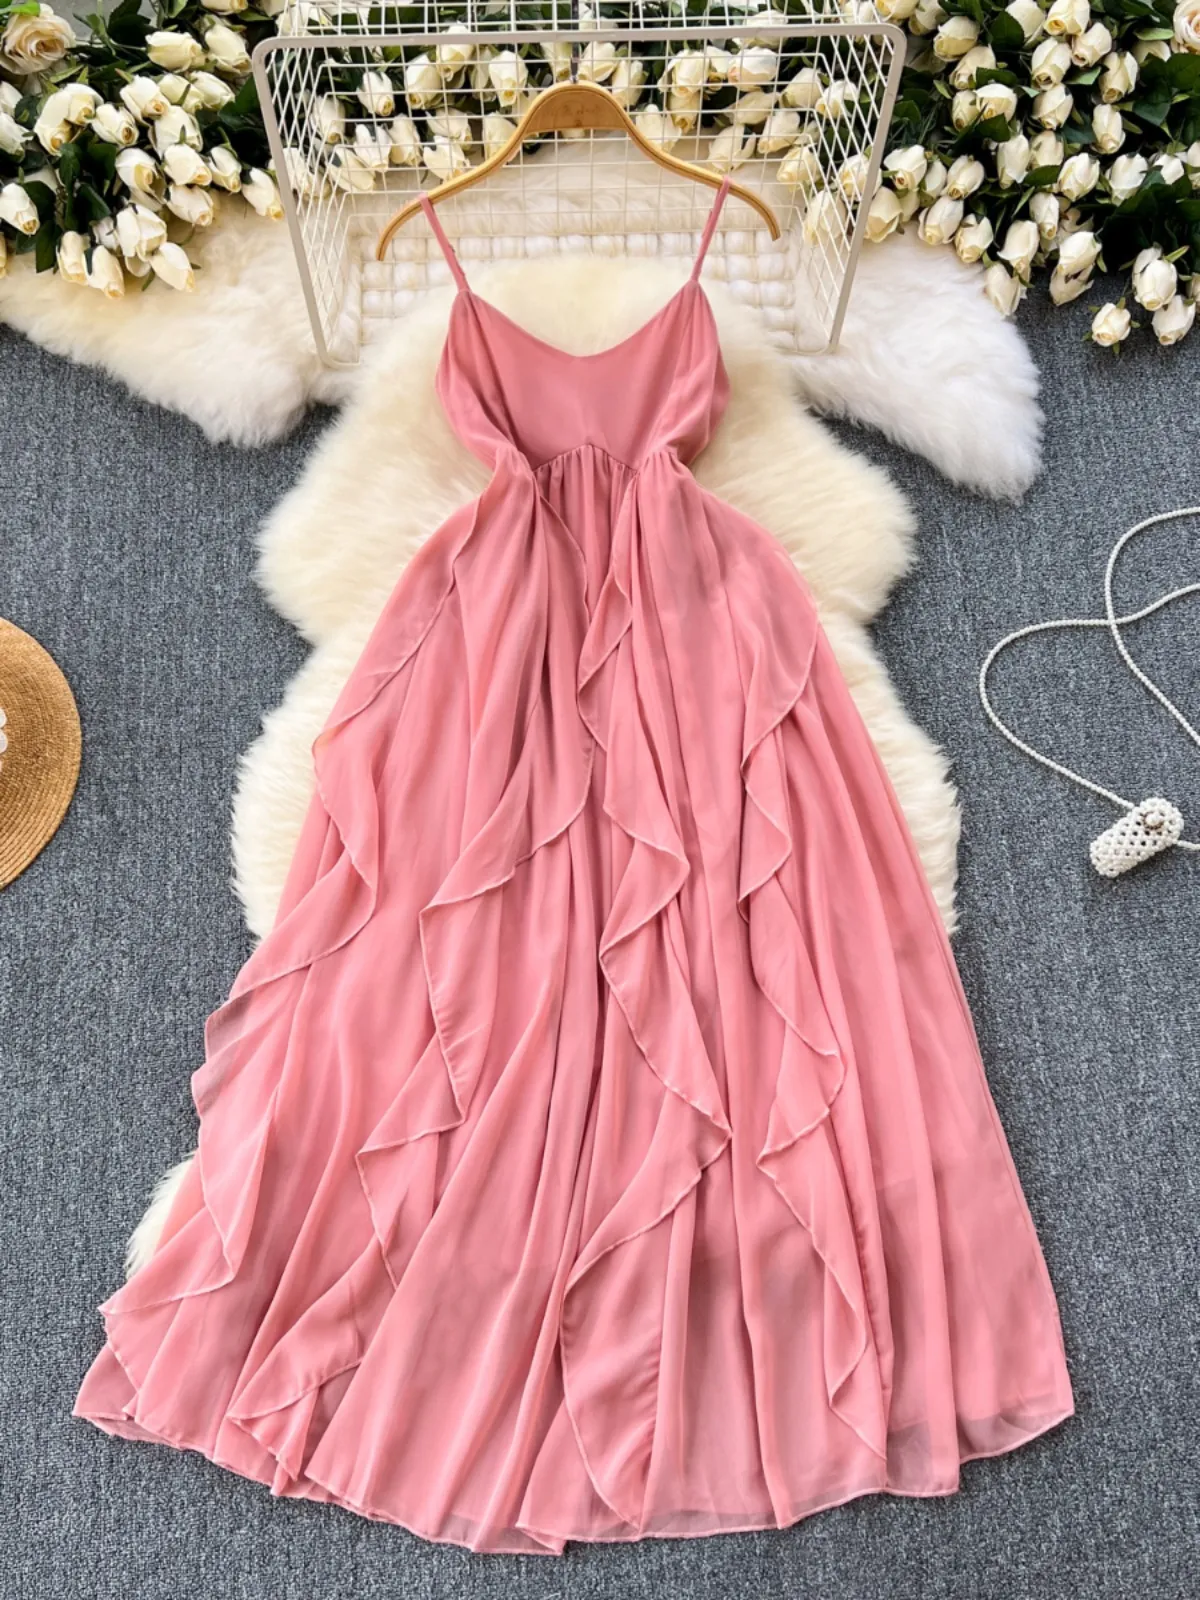 Pink camisole dress for women, French sweet and girlish, with ruffled edges and sleeveless vacation dress, fairy like long skirt